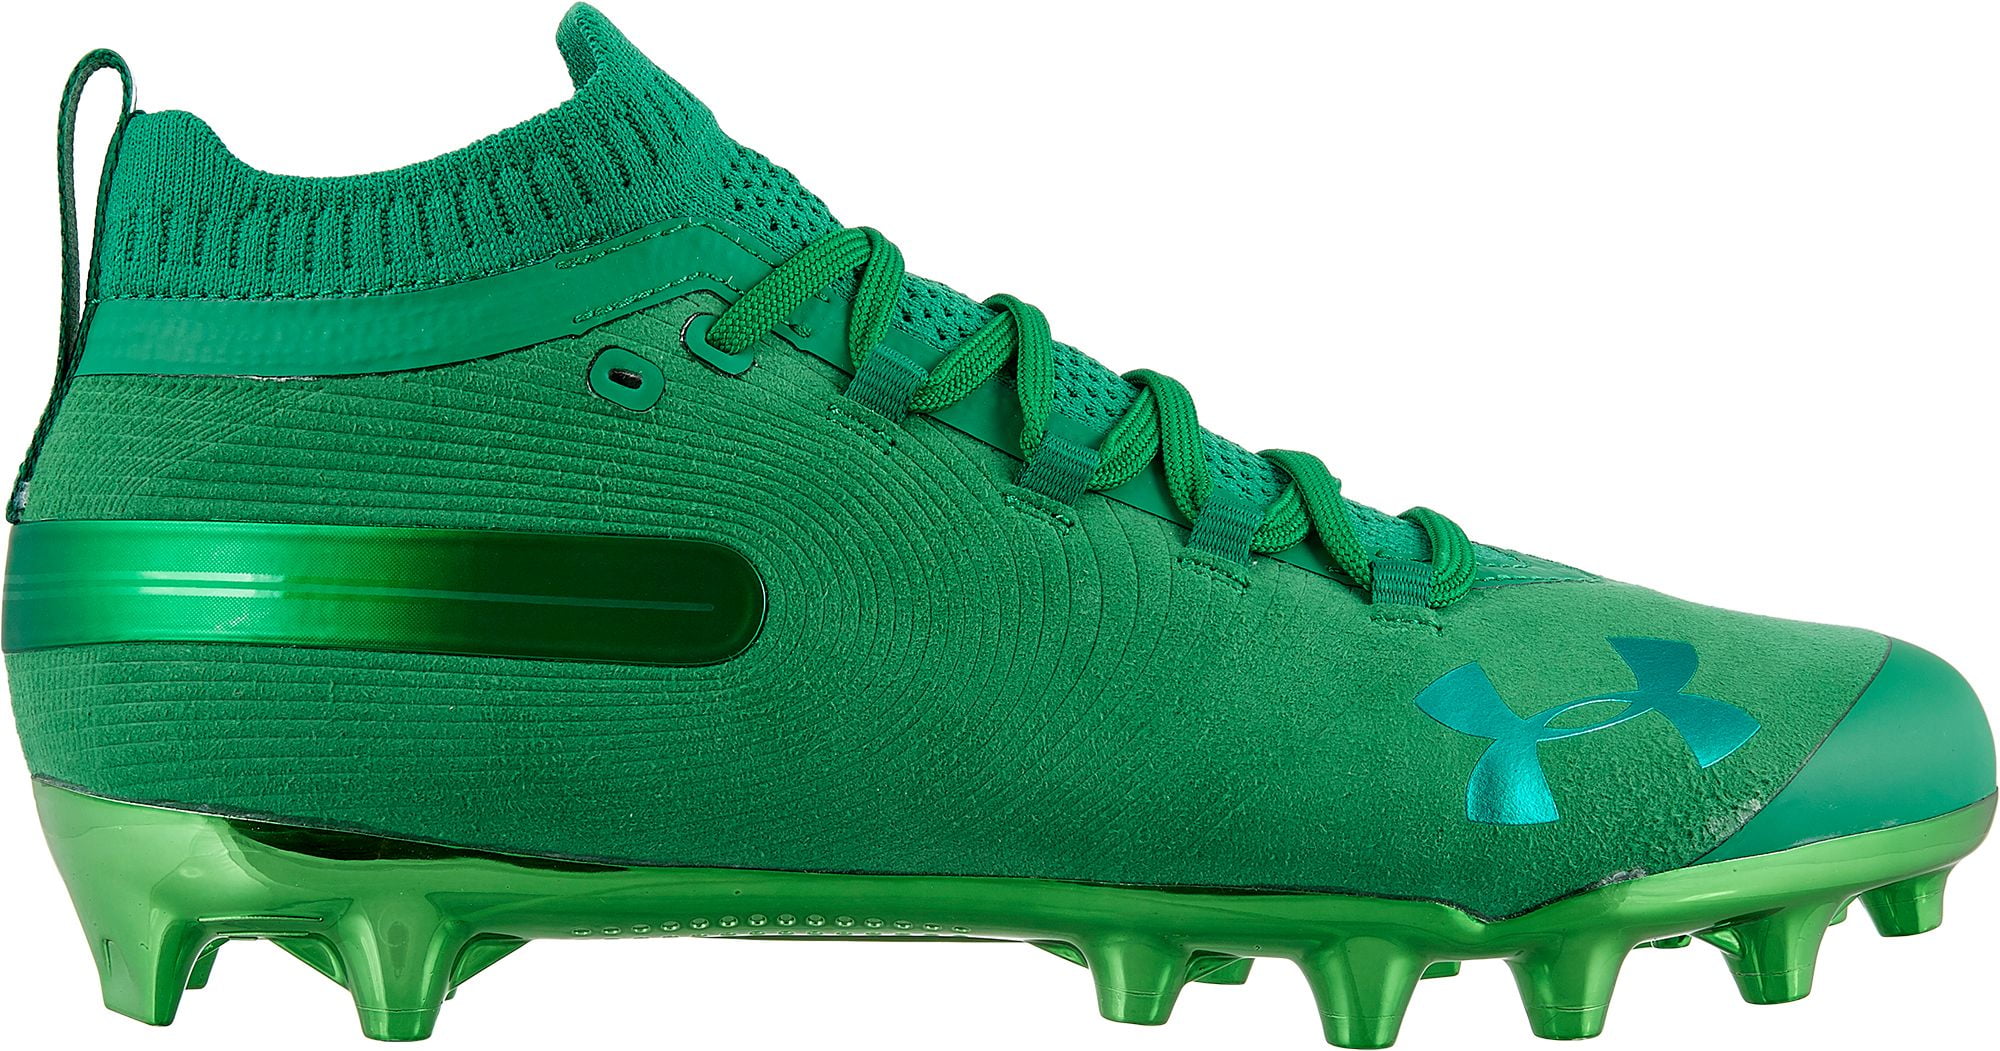 under armour blue suede cleats